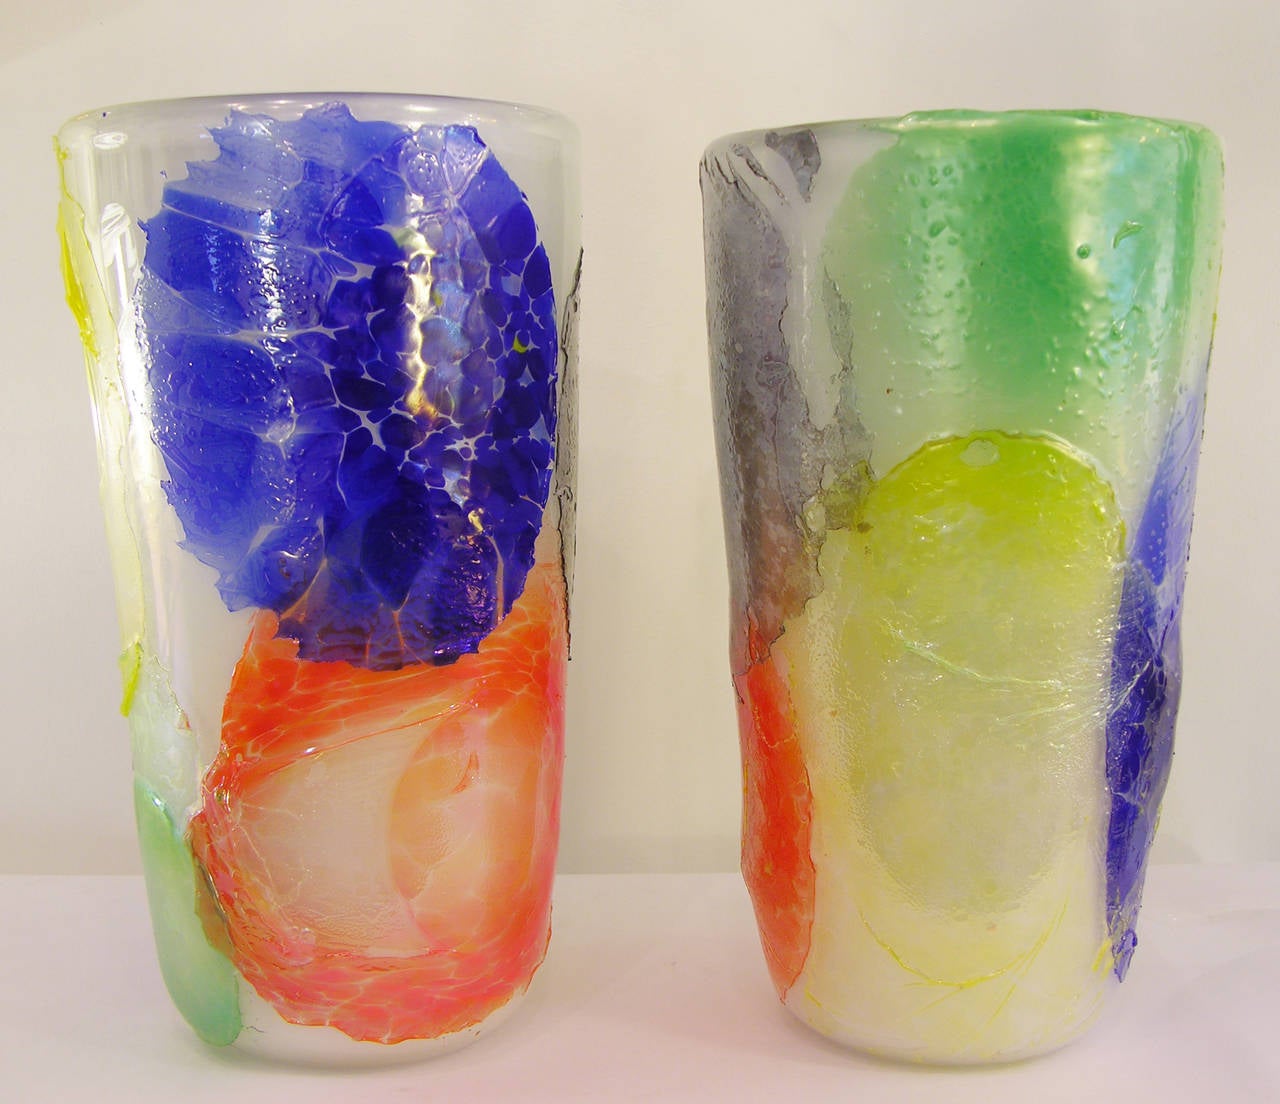 Striking Pair of Murano Glass Vases Decorated with Colorful Iridescent Disks 3